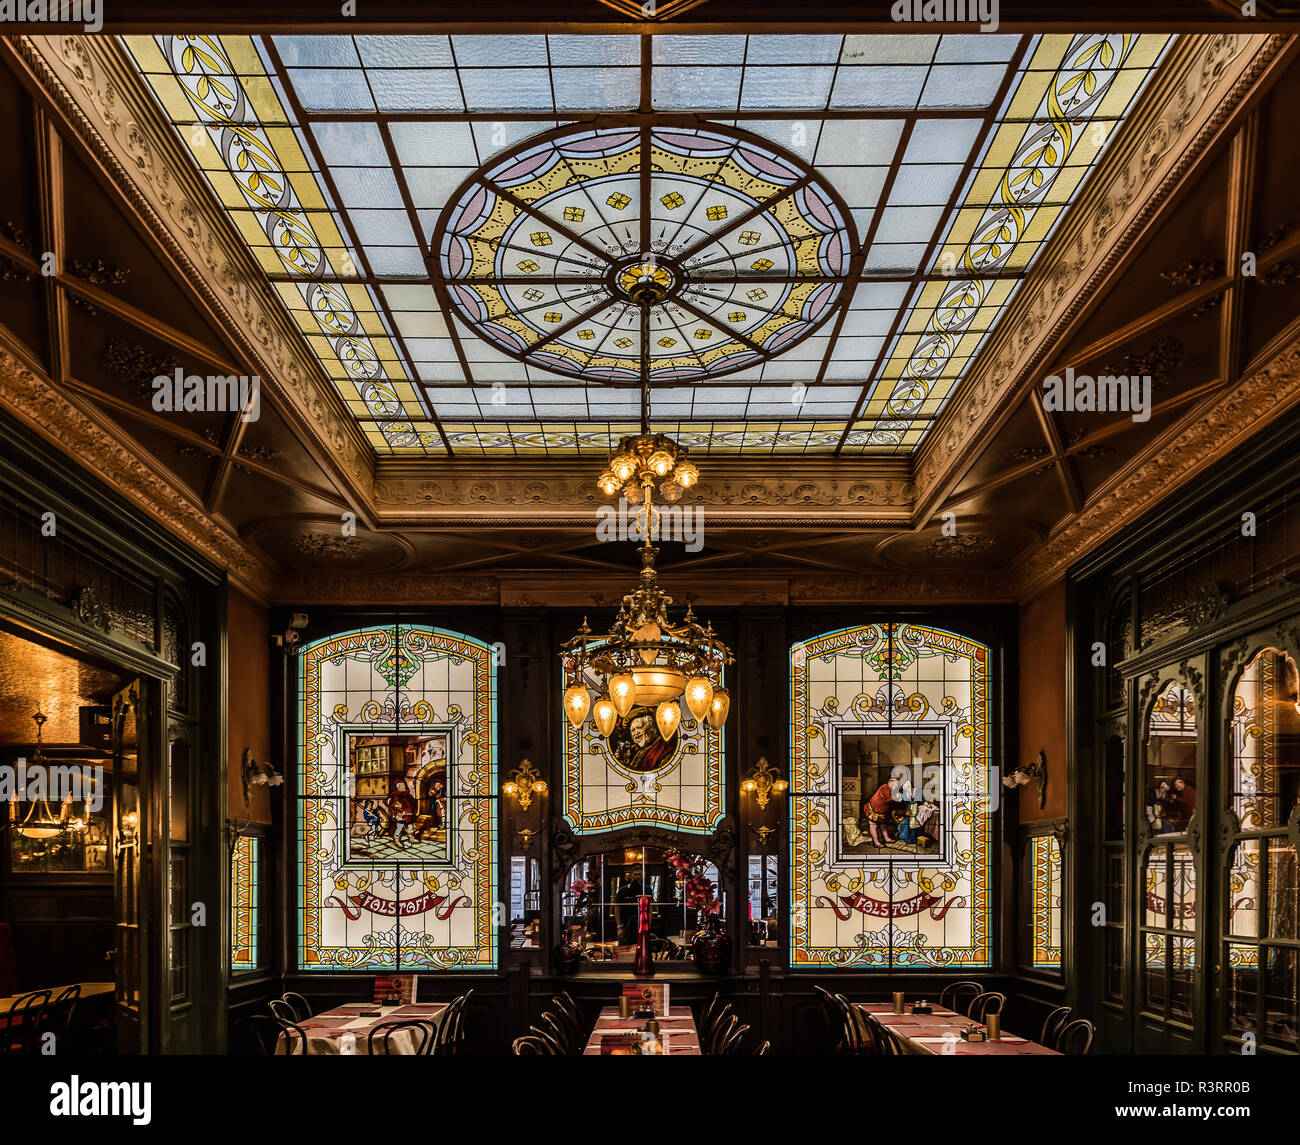 Decorated interior design of the brasserie Le Falstaff in old town Stock Photo